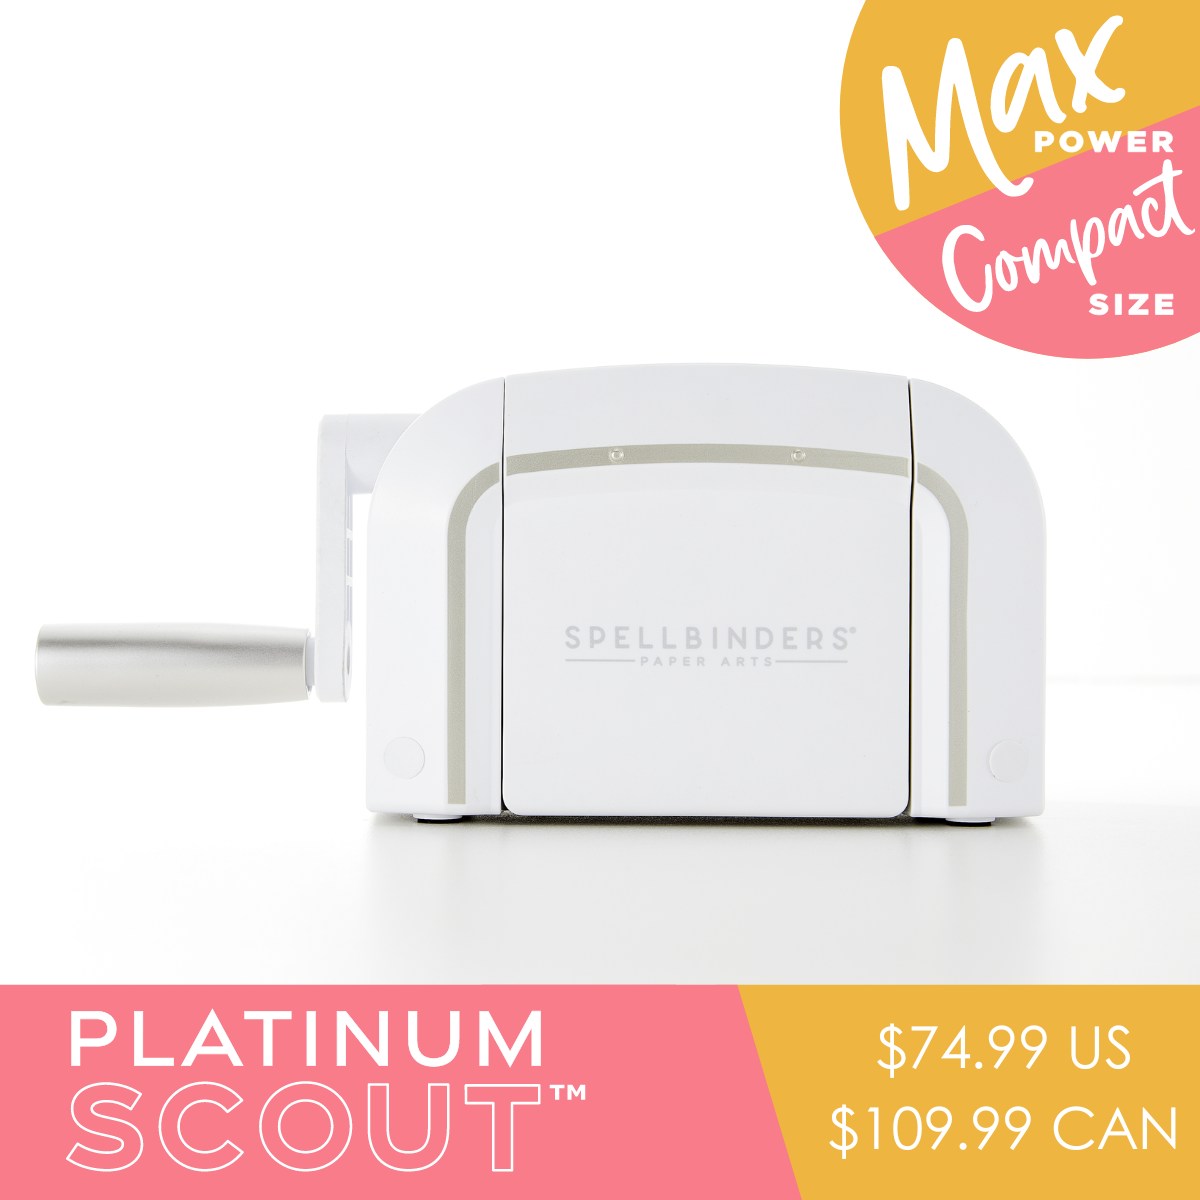 WHITE Platinum Scout Machine Deposit--SOLD OUT